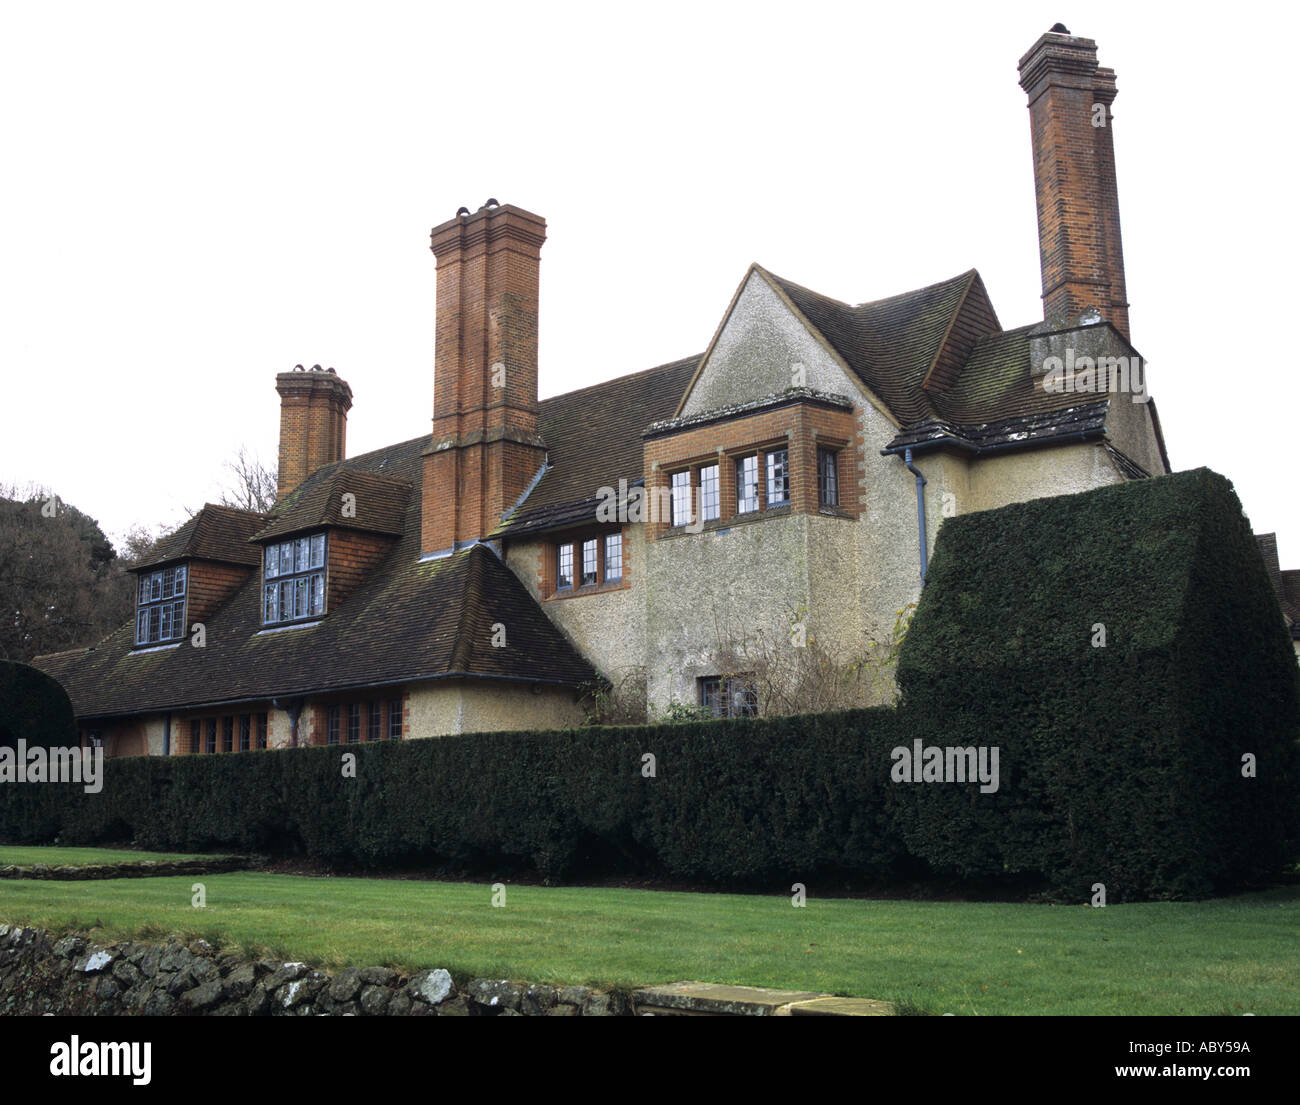 ABINGER COMMON SURREY UK Goddards built by Edwin Lutyens for F Mirrielees in 1898 one of most important early houses of English Arts and Crafts Stock Photo